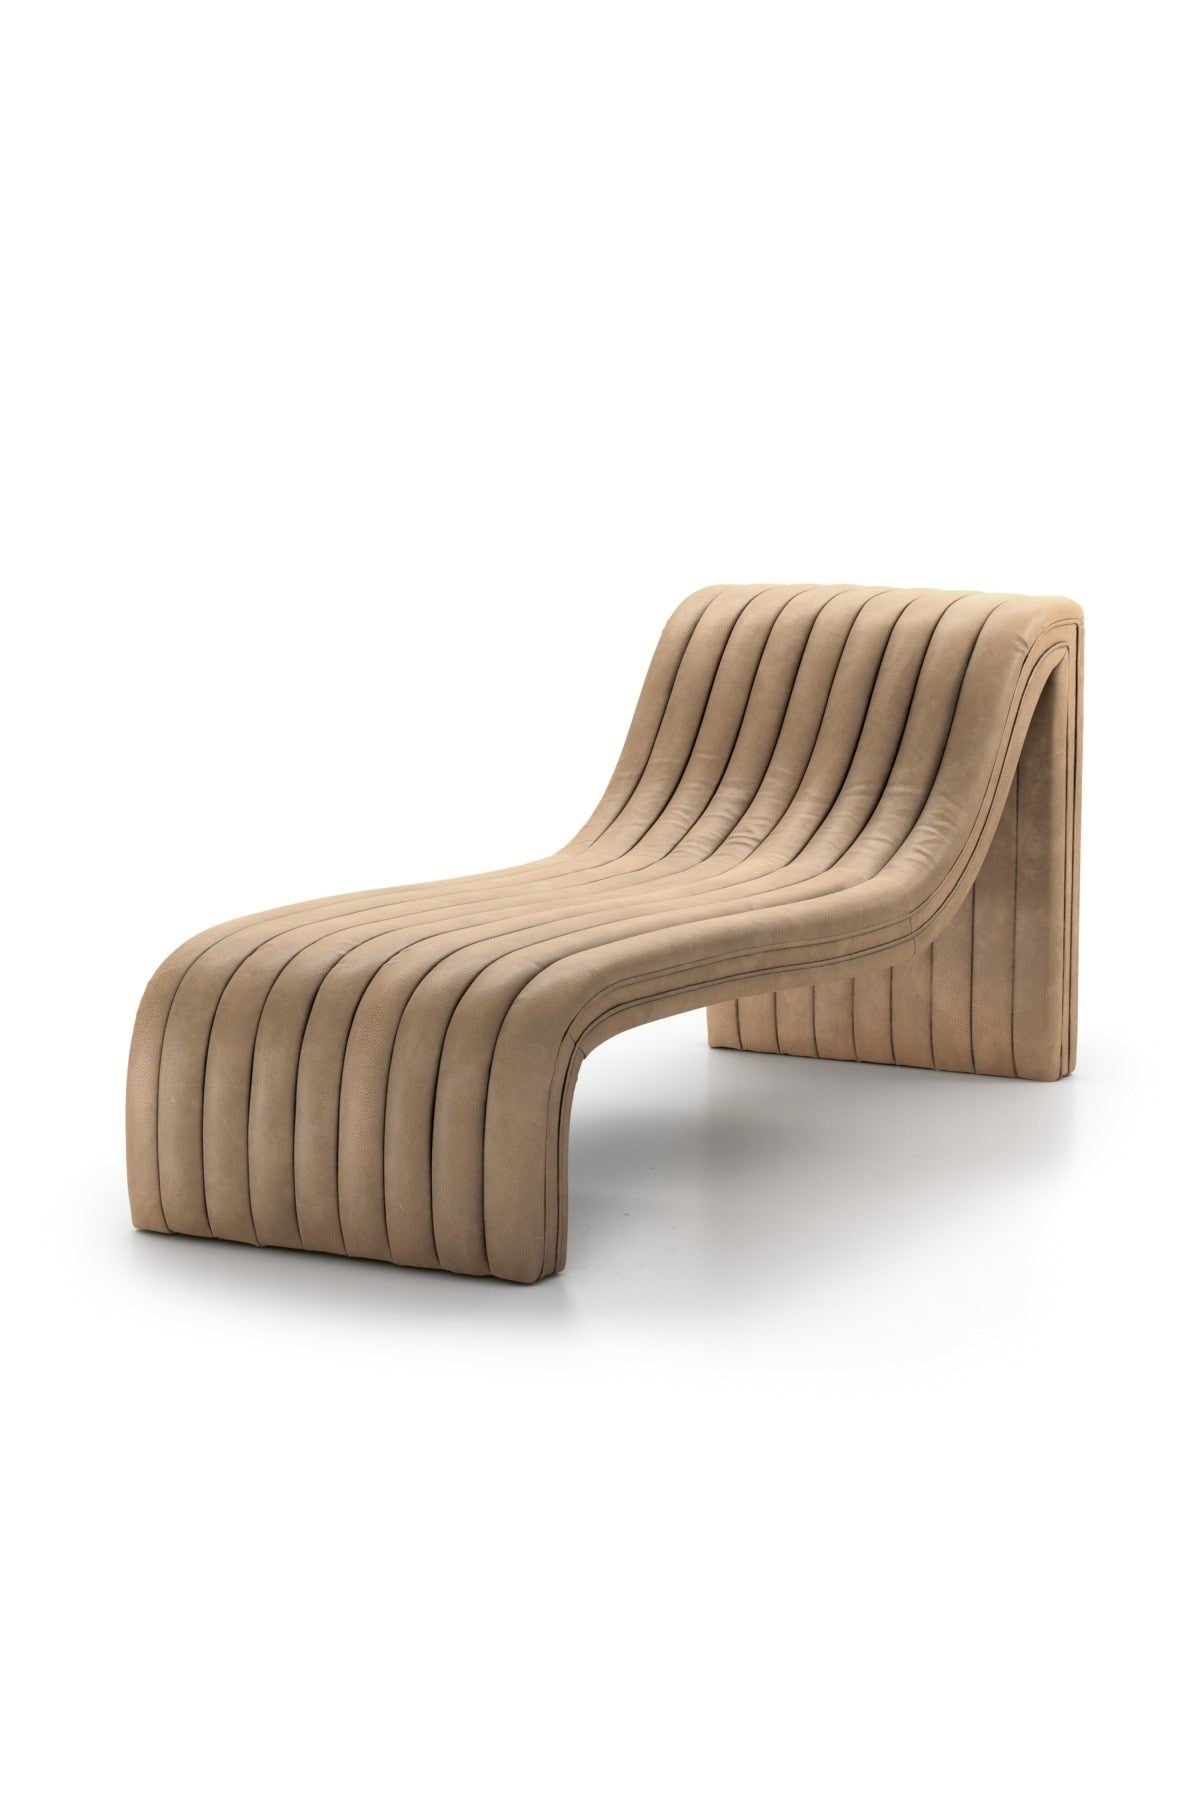 Dove Chaise Lounge - Drift Leather